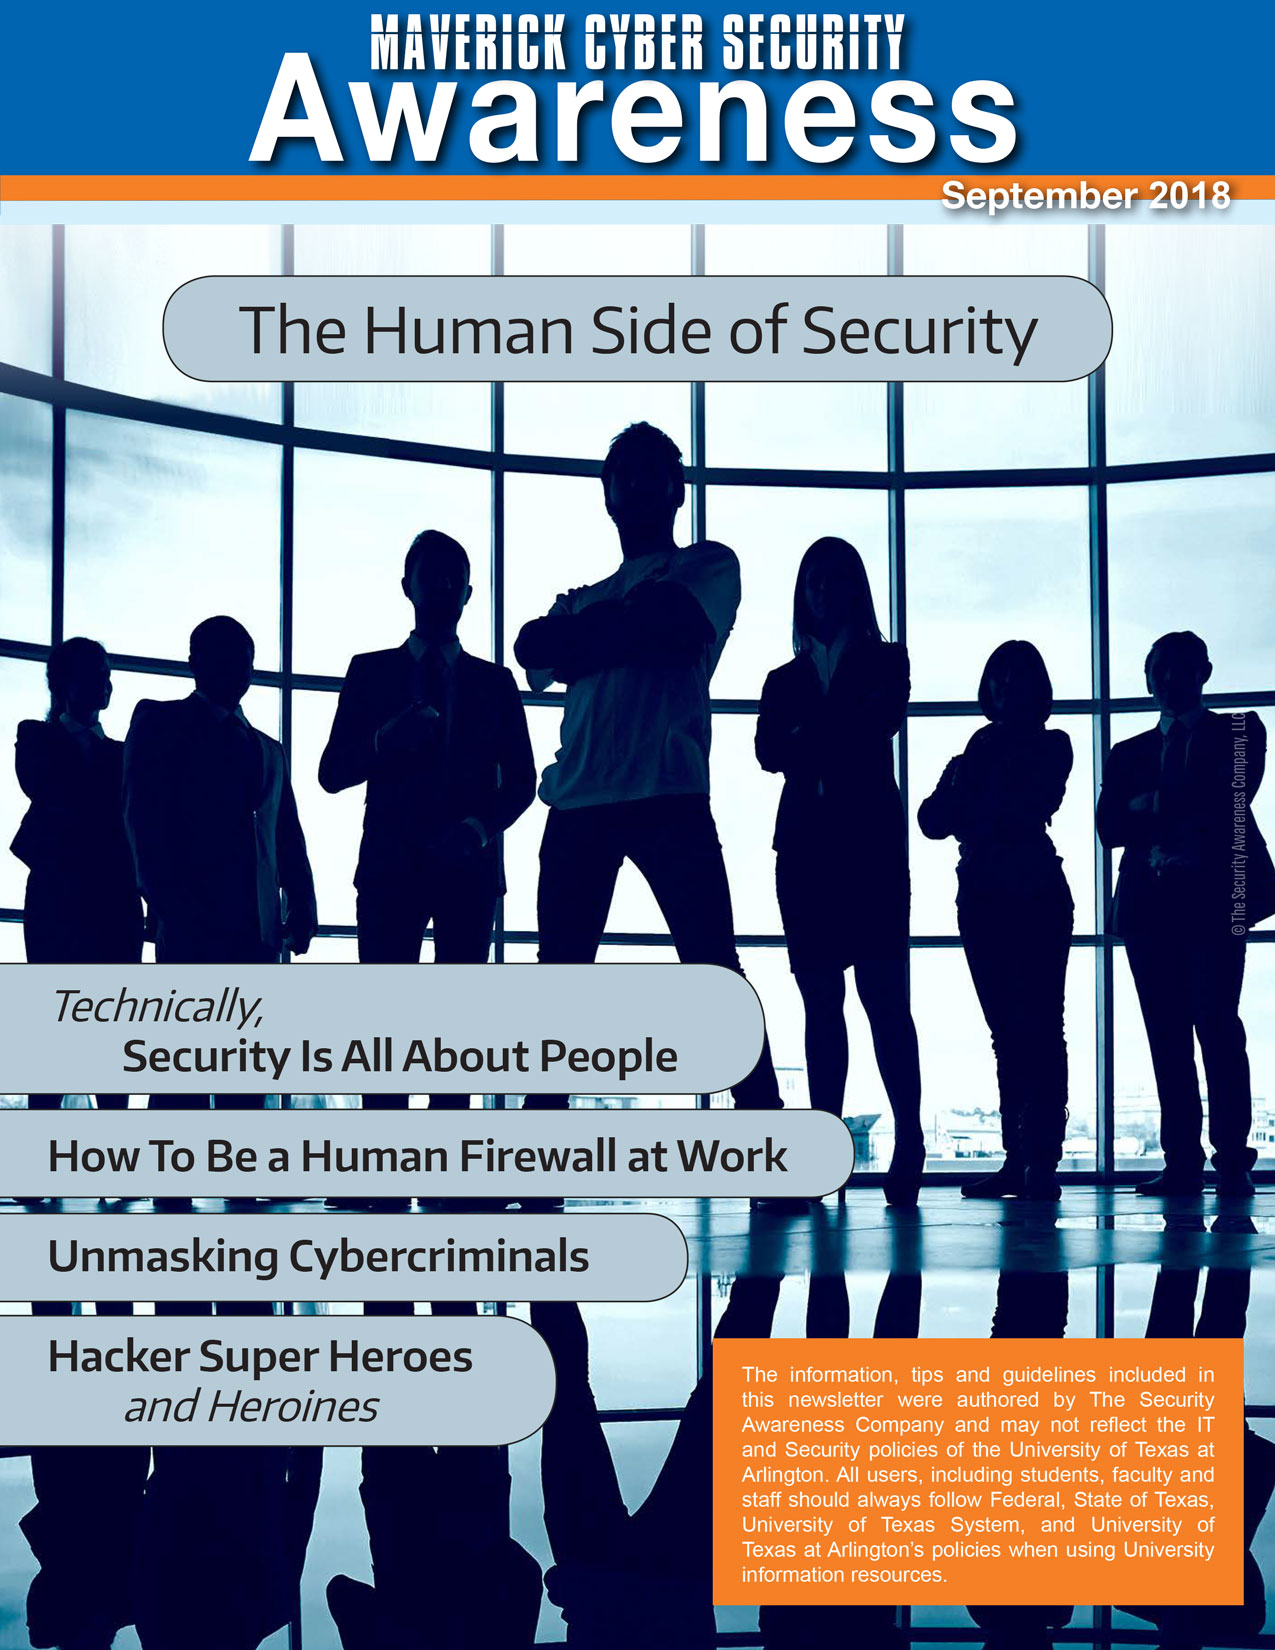 The Human Side of Security